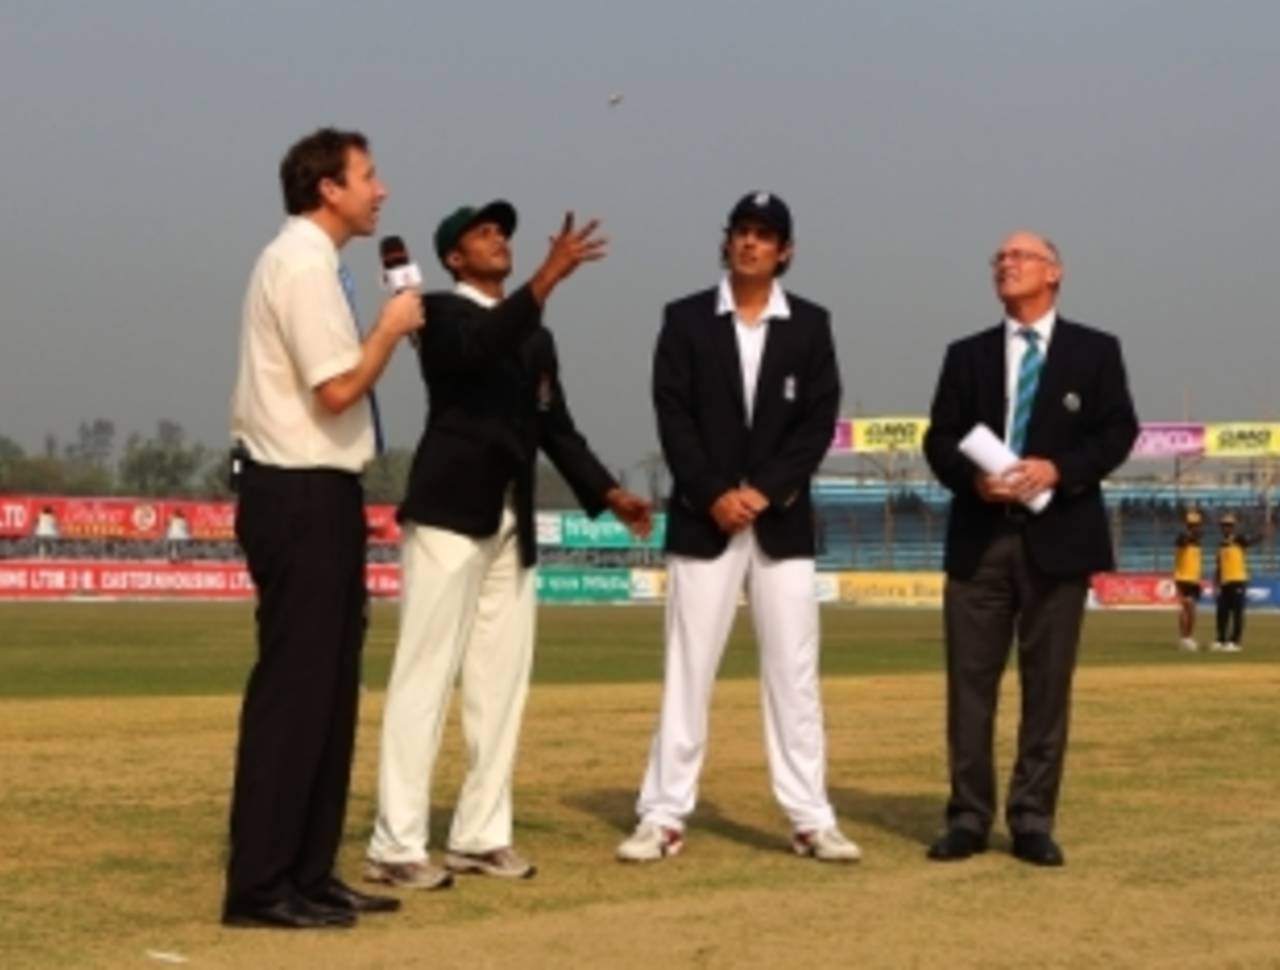 Winning the toss was about as good as it got for Shakib al Hasan on the first day of the Test, Bangladesh v England, 1st Test, Chittagong, March 12, 2010